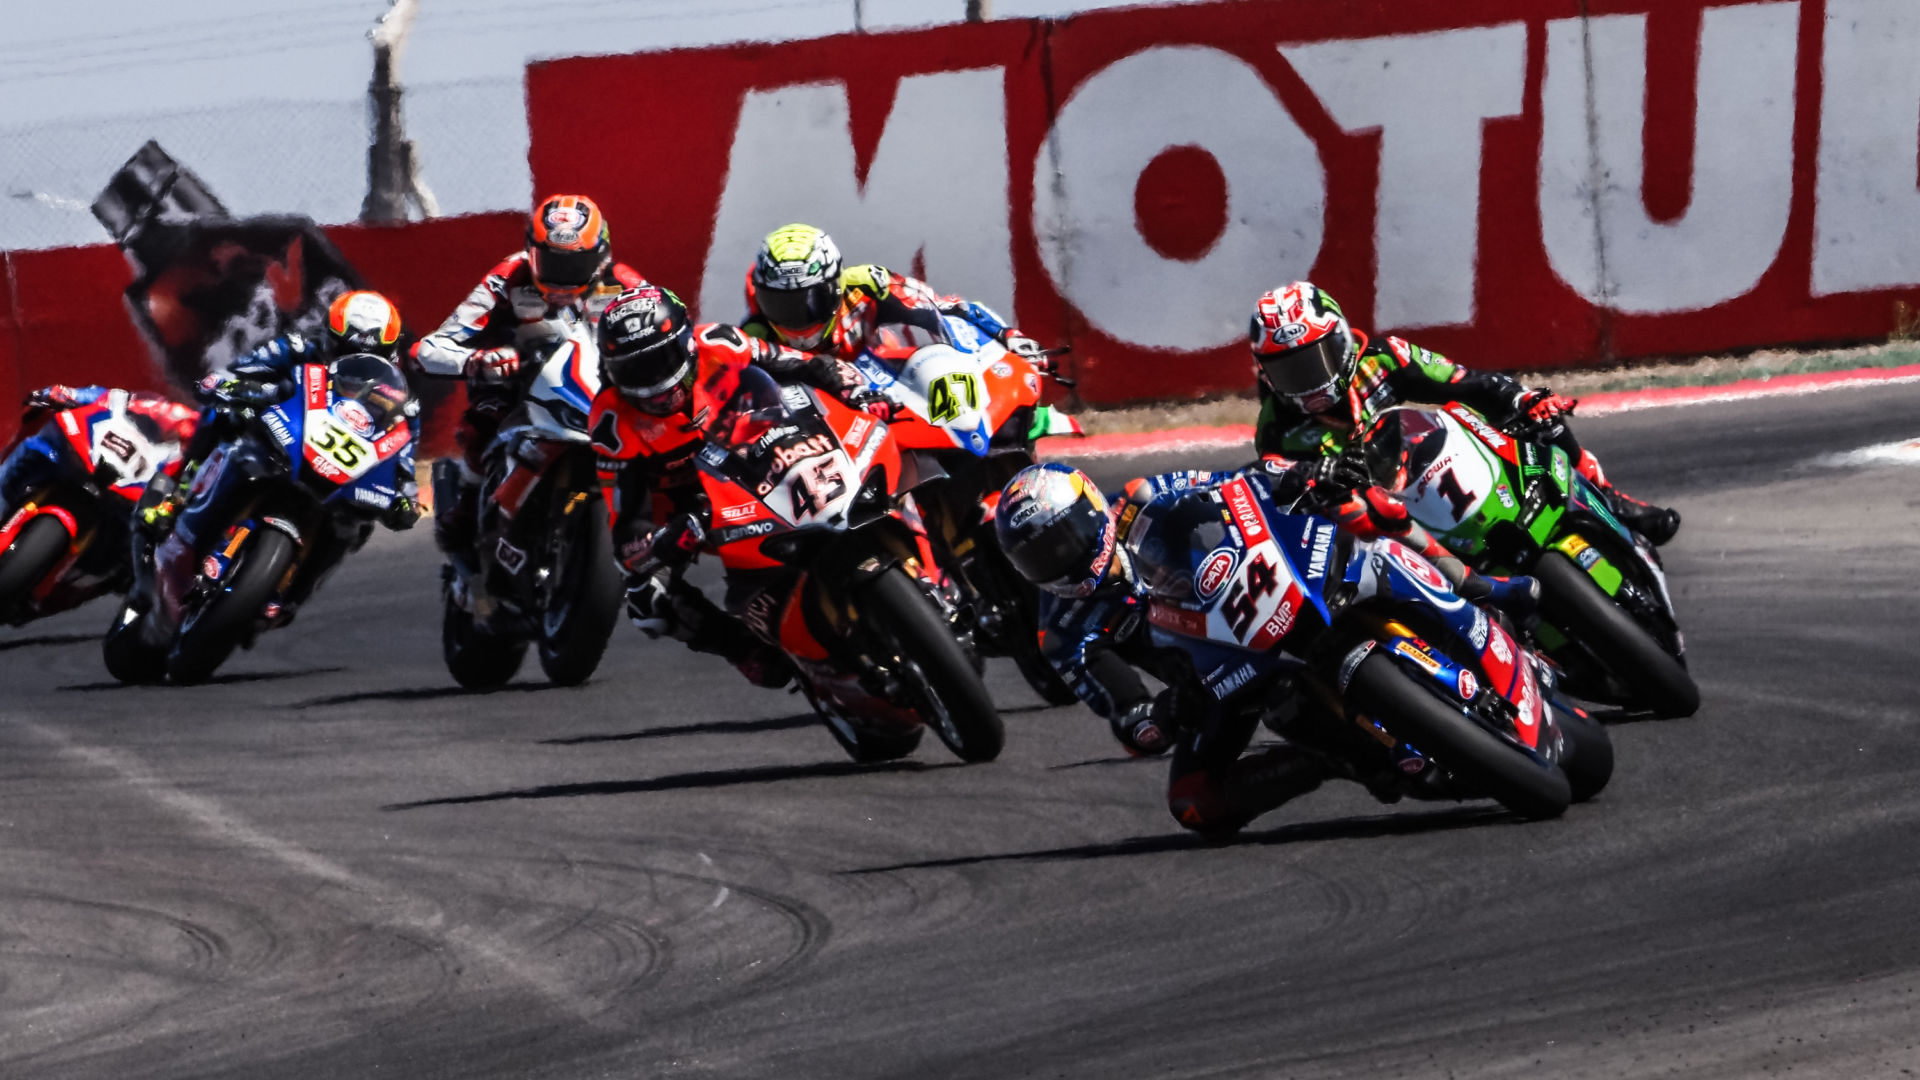 The all-new Pertamina Mandalika International Street Circuit in Indonesia hosts the 2021 FIM Superbike World Championship finale this coming weekend. Photo courtesy Dorna.